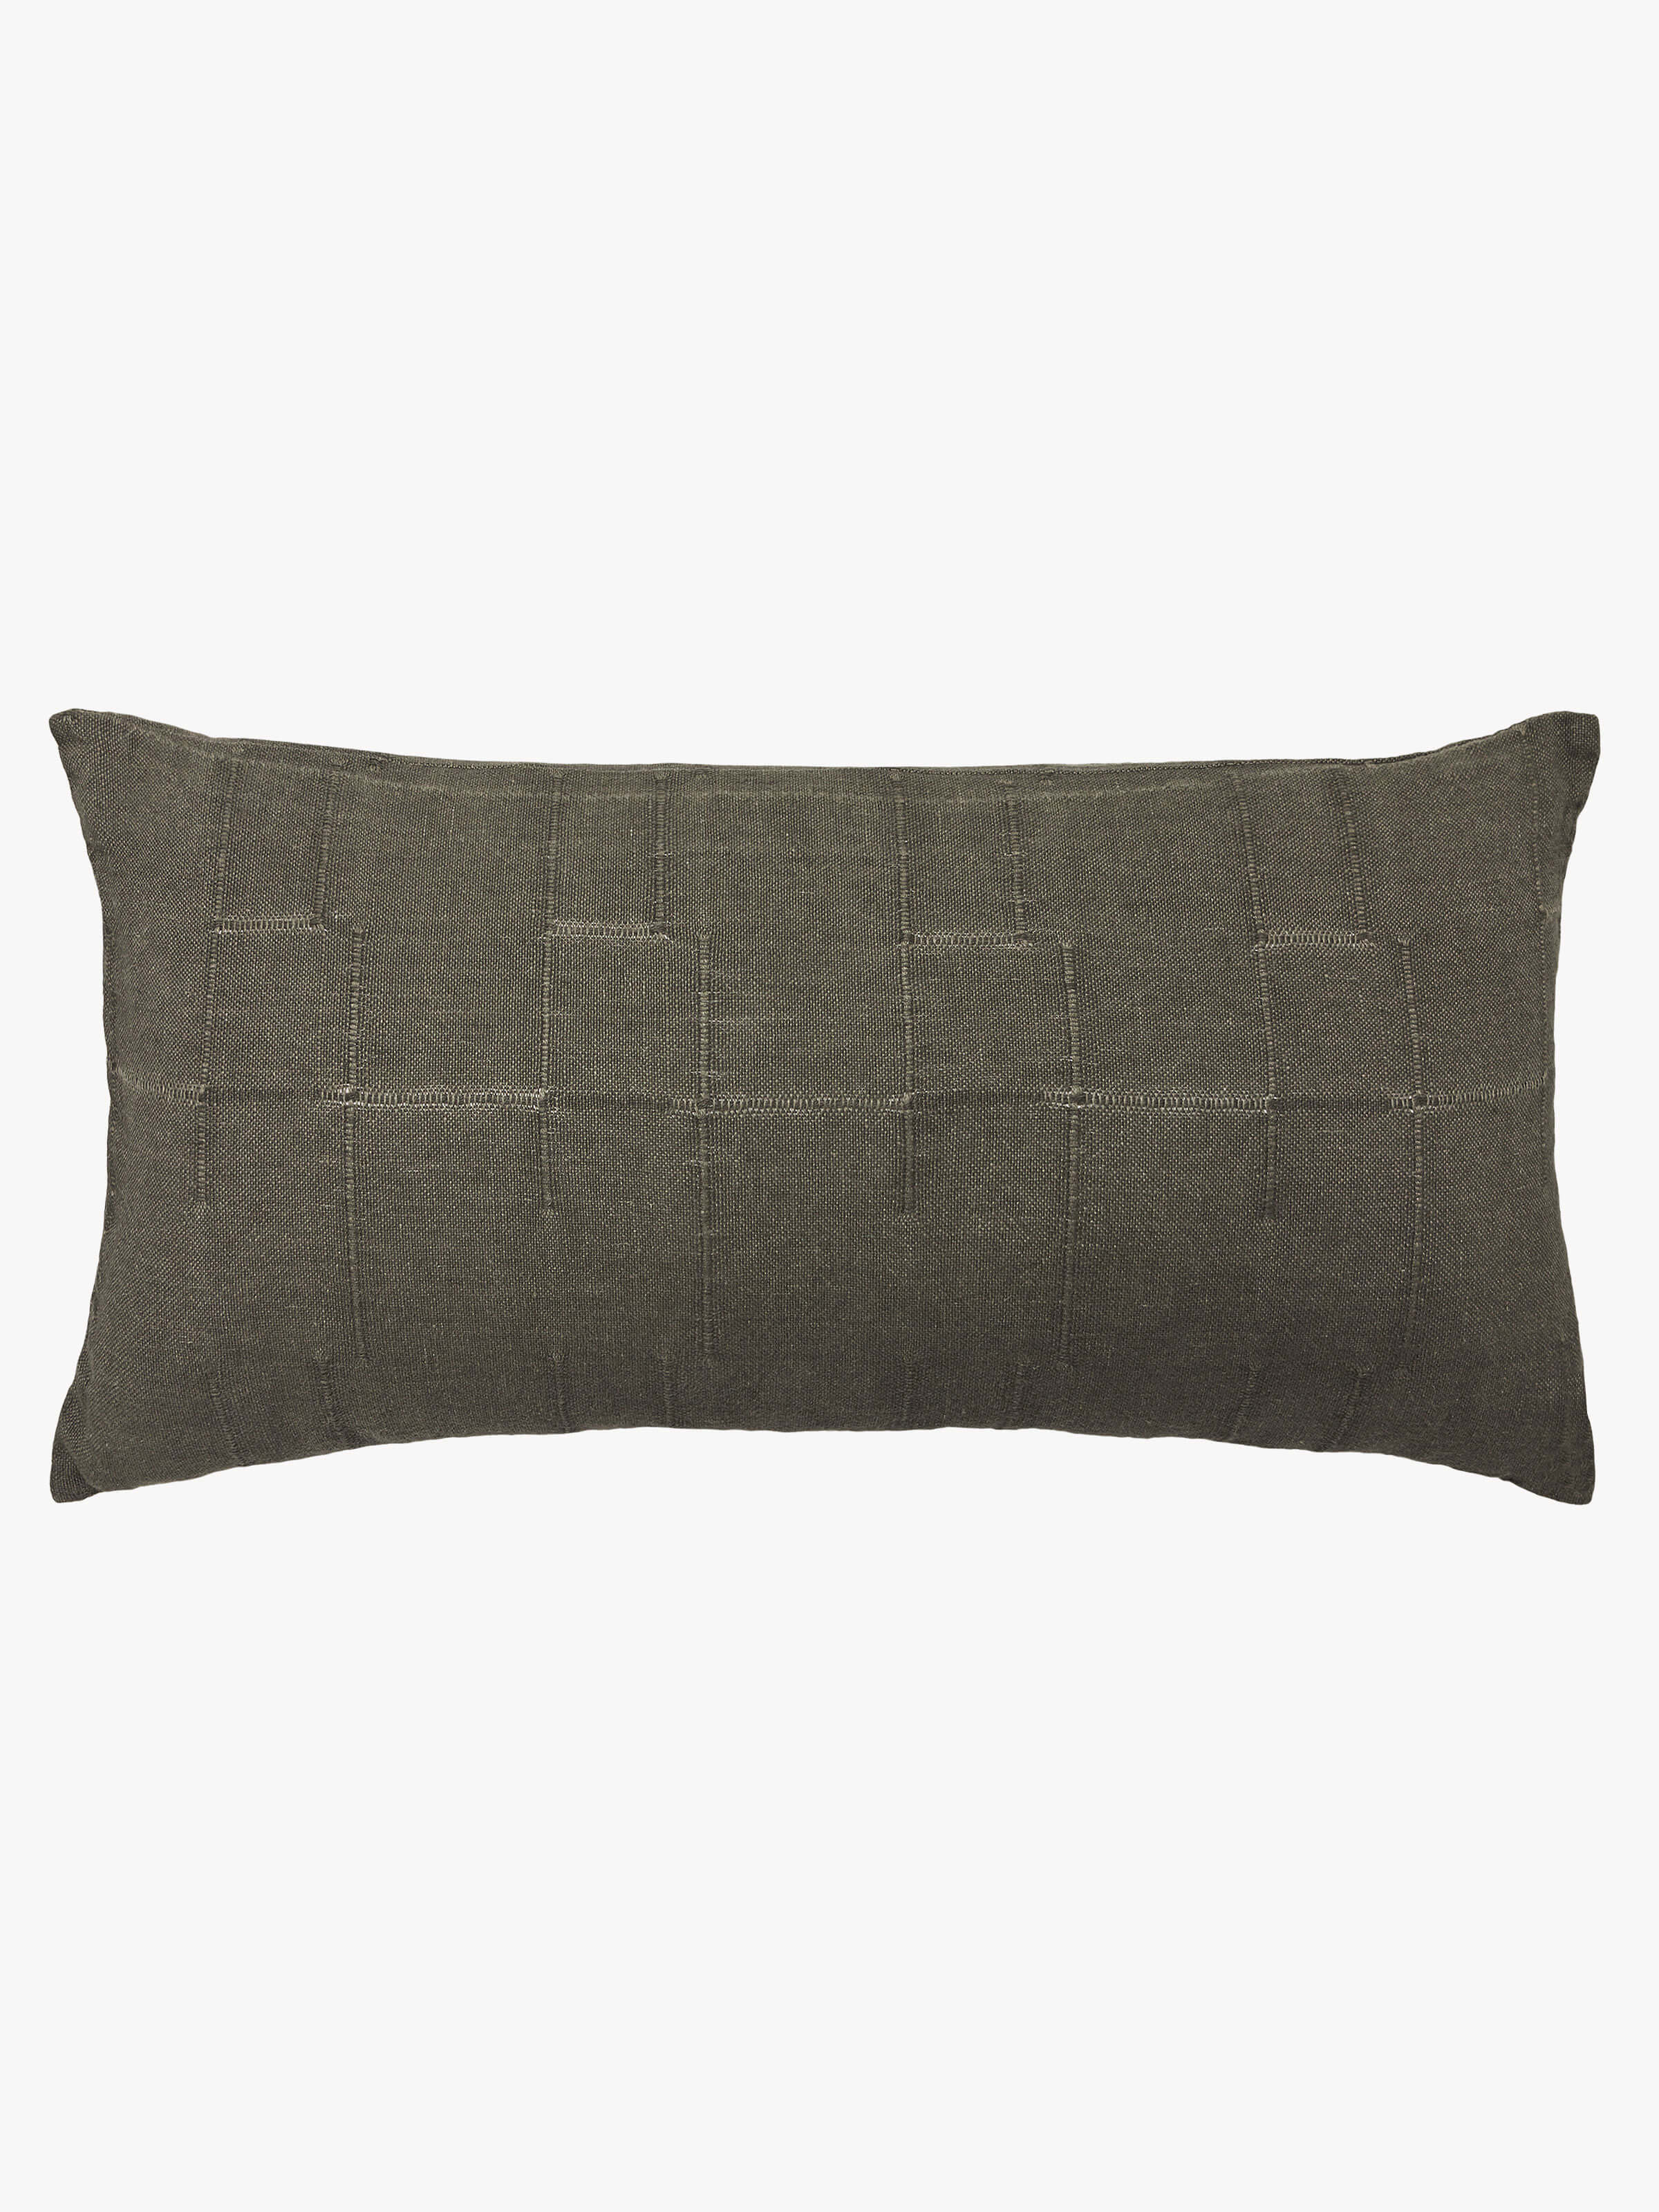 Palermo Olive French Linen Lumbar Cushion